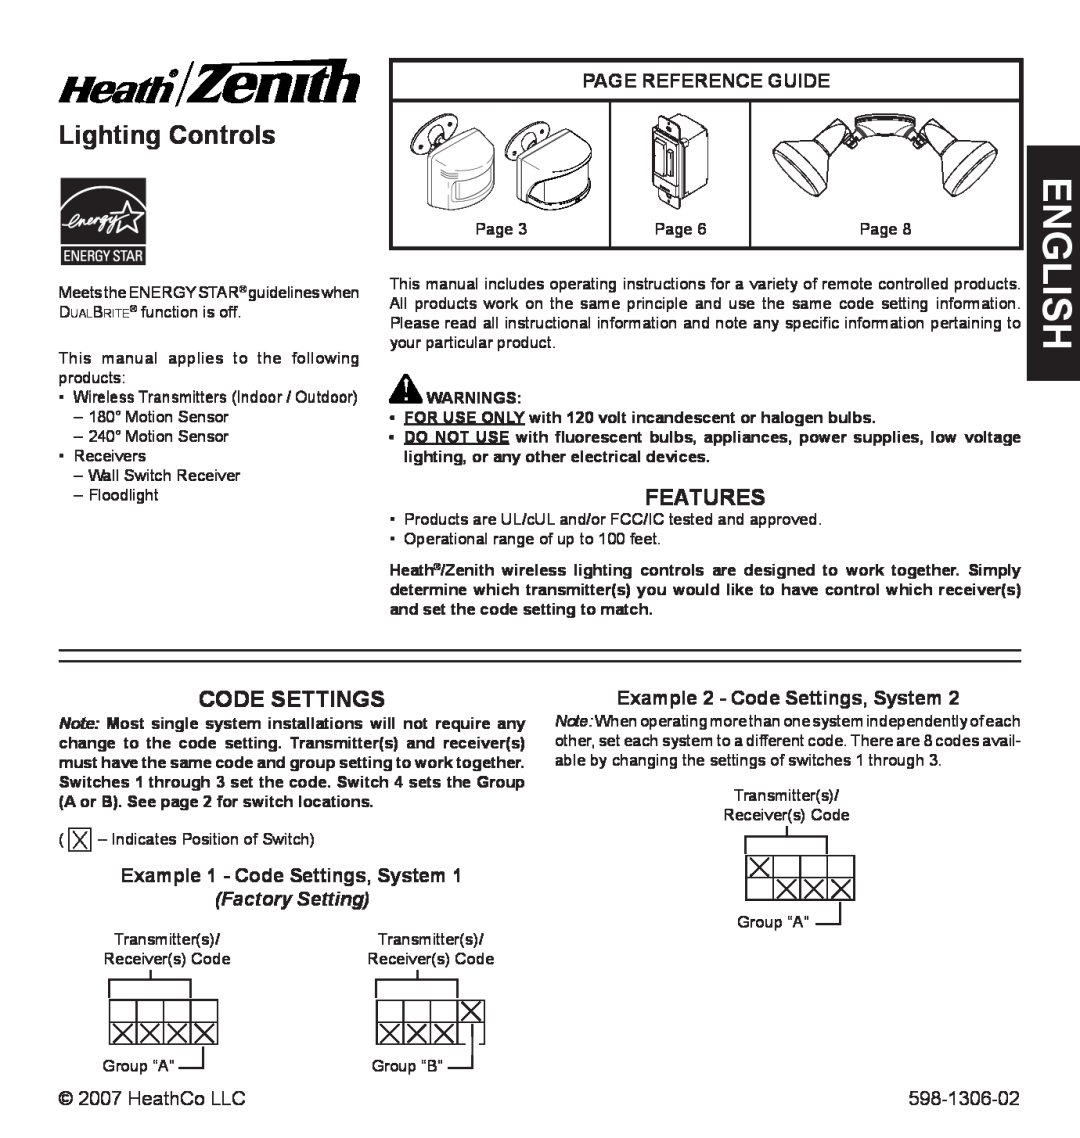 Heath Zenith 598-1306-02 manual English, Lighting Controls, Features, Code Settings, Page Reference Guide, Factory Setting 